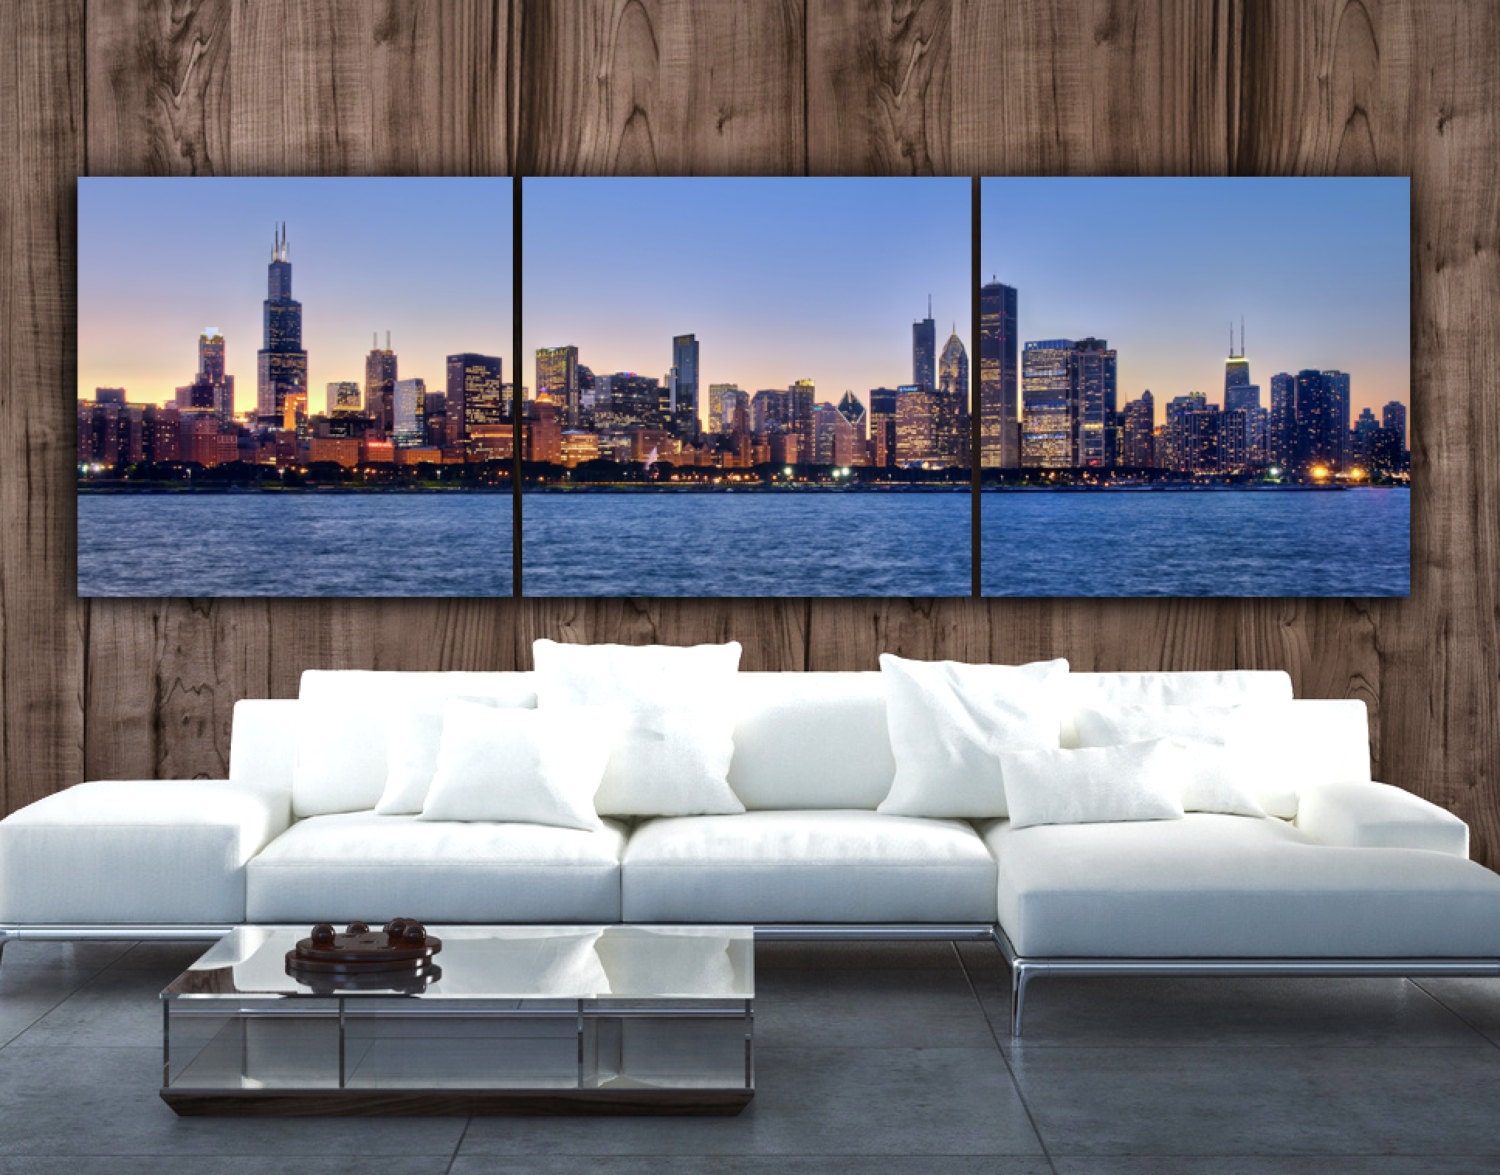 Chicago Skyline on Canvas Large Wall Art Chicago Print